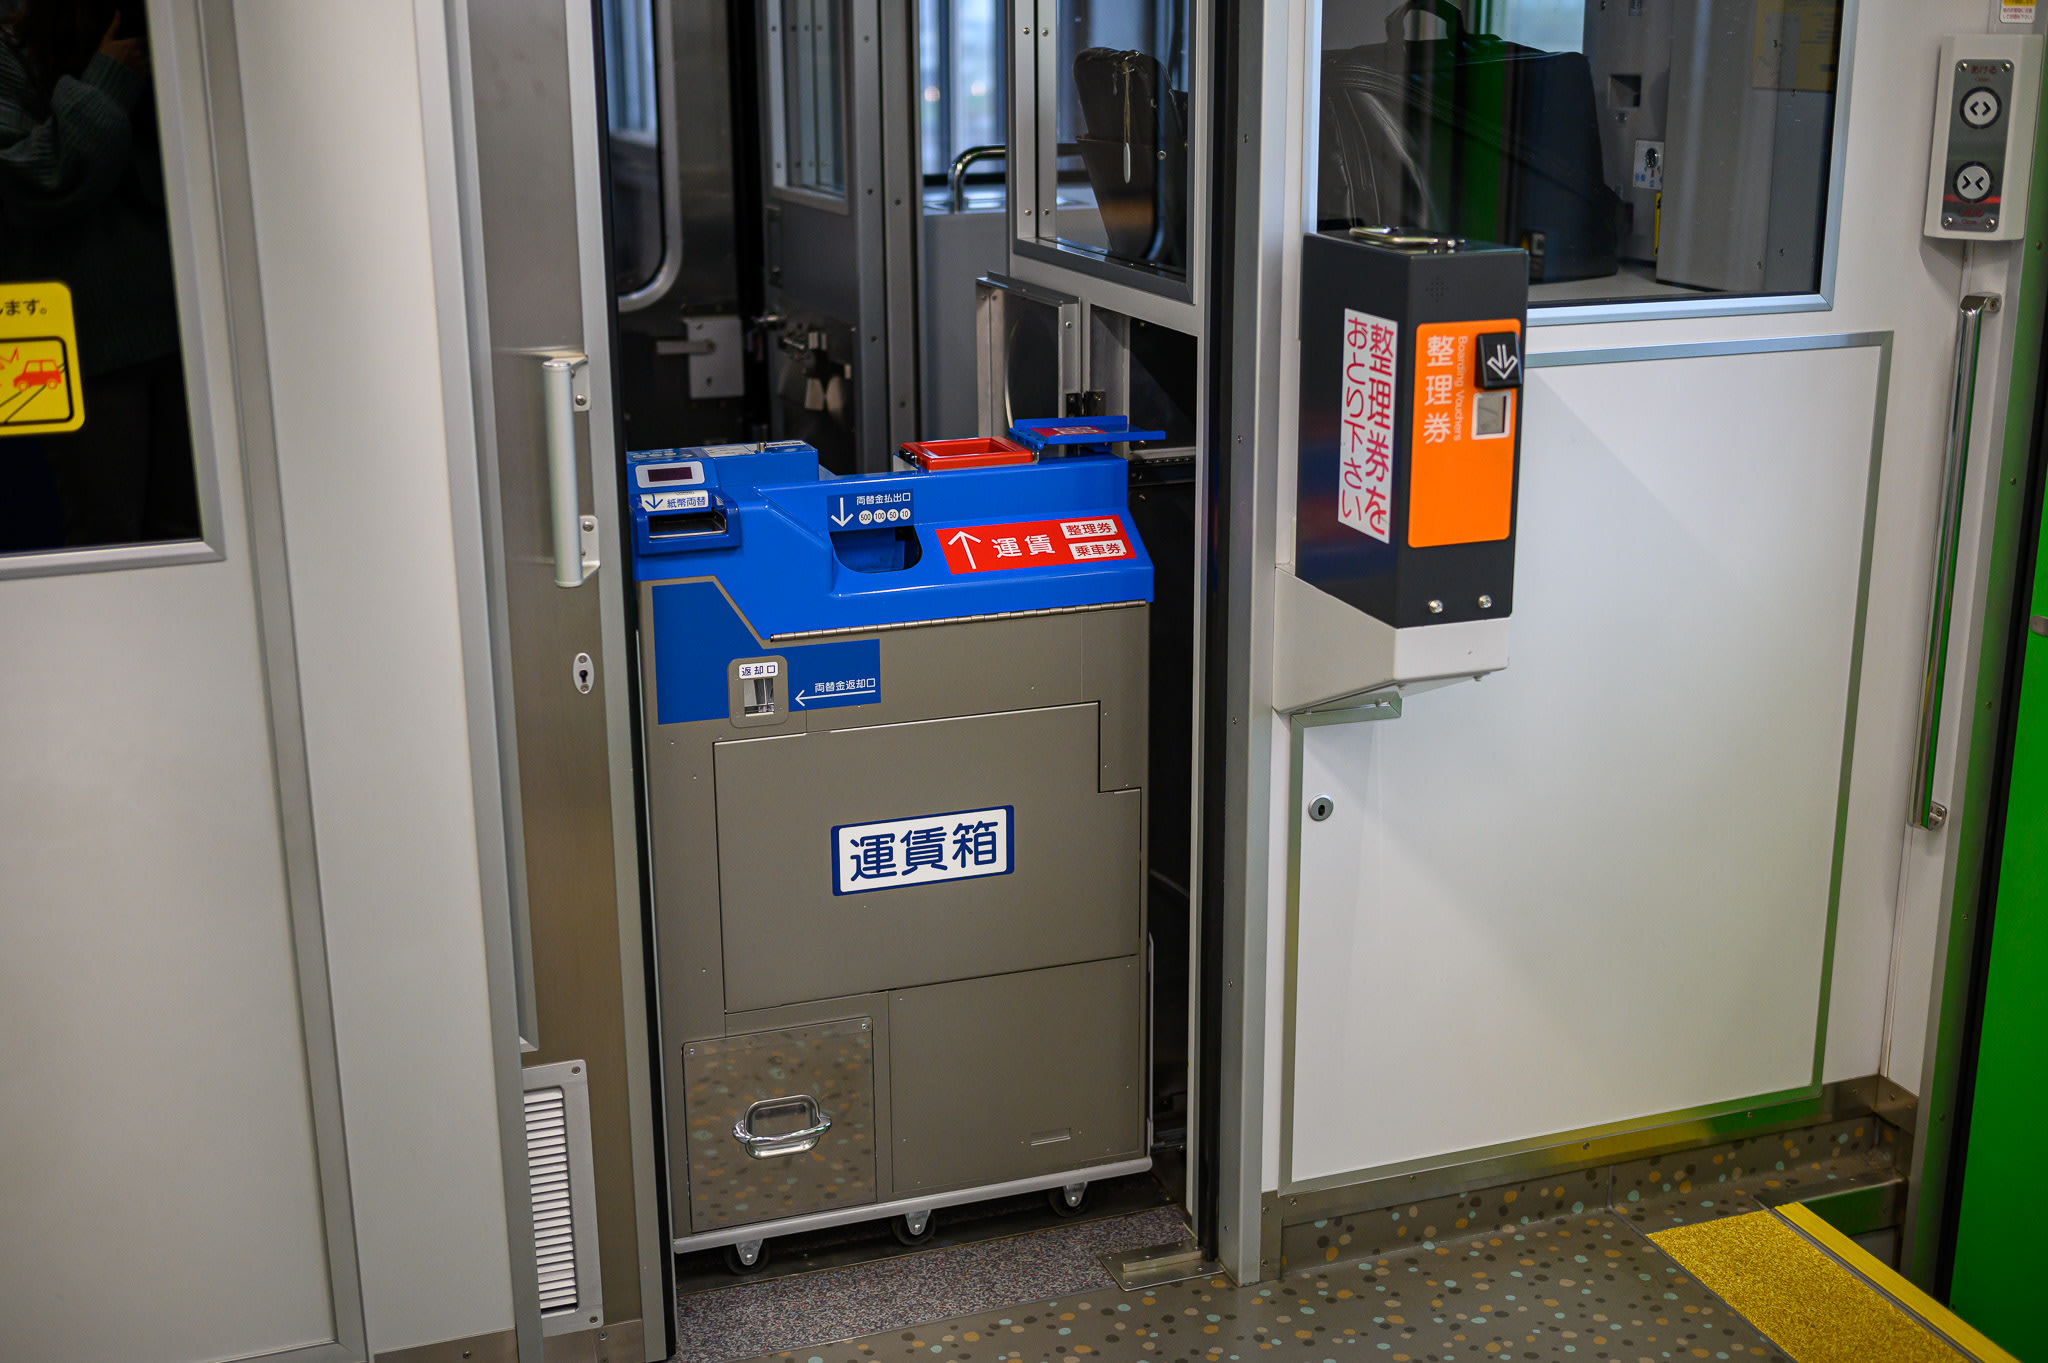 A ticket dispenser and a fare box on a small local train in Hokkaido. There is no electronic pad for an IC Card on either device.